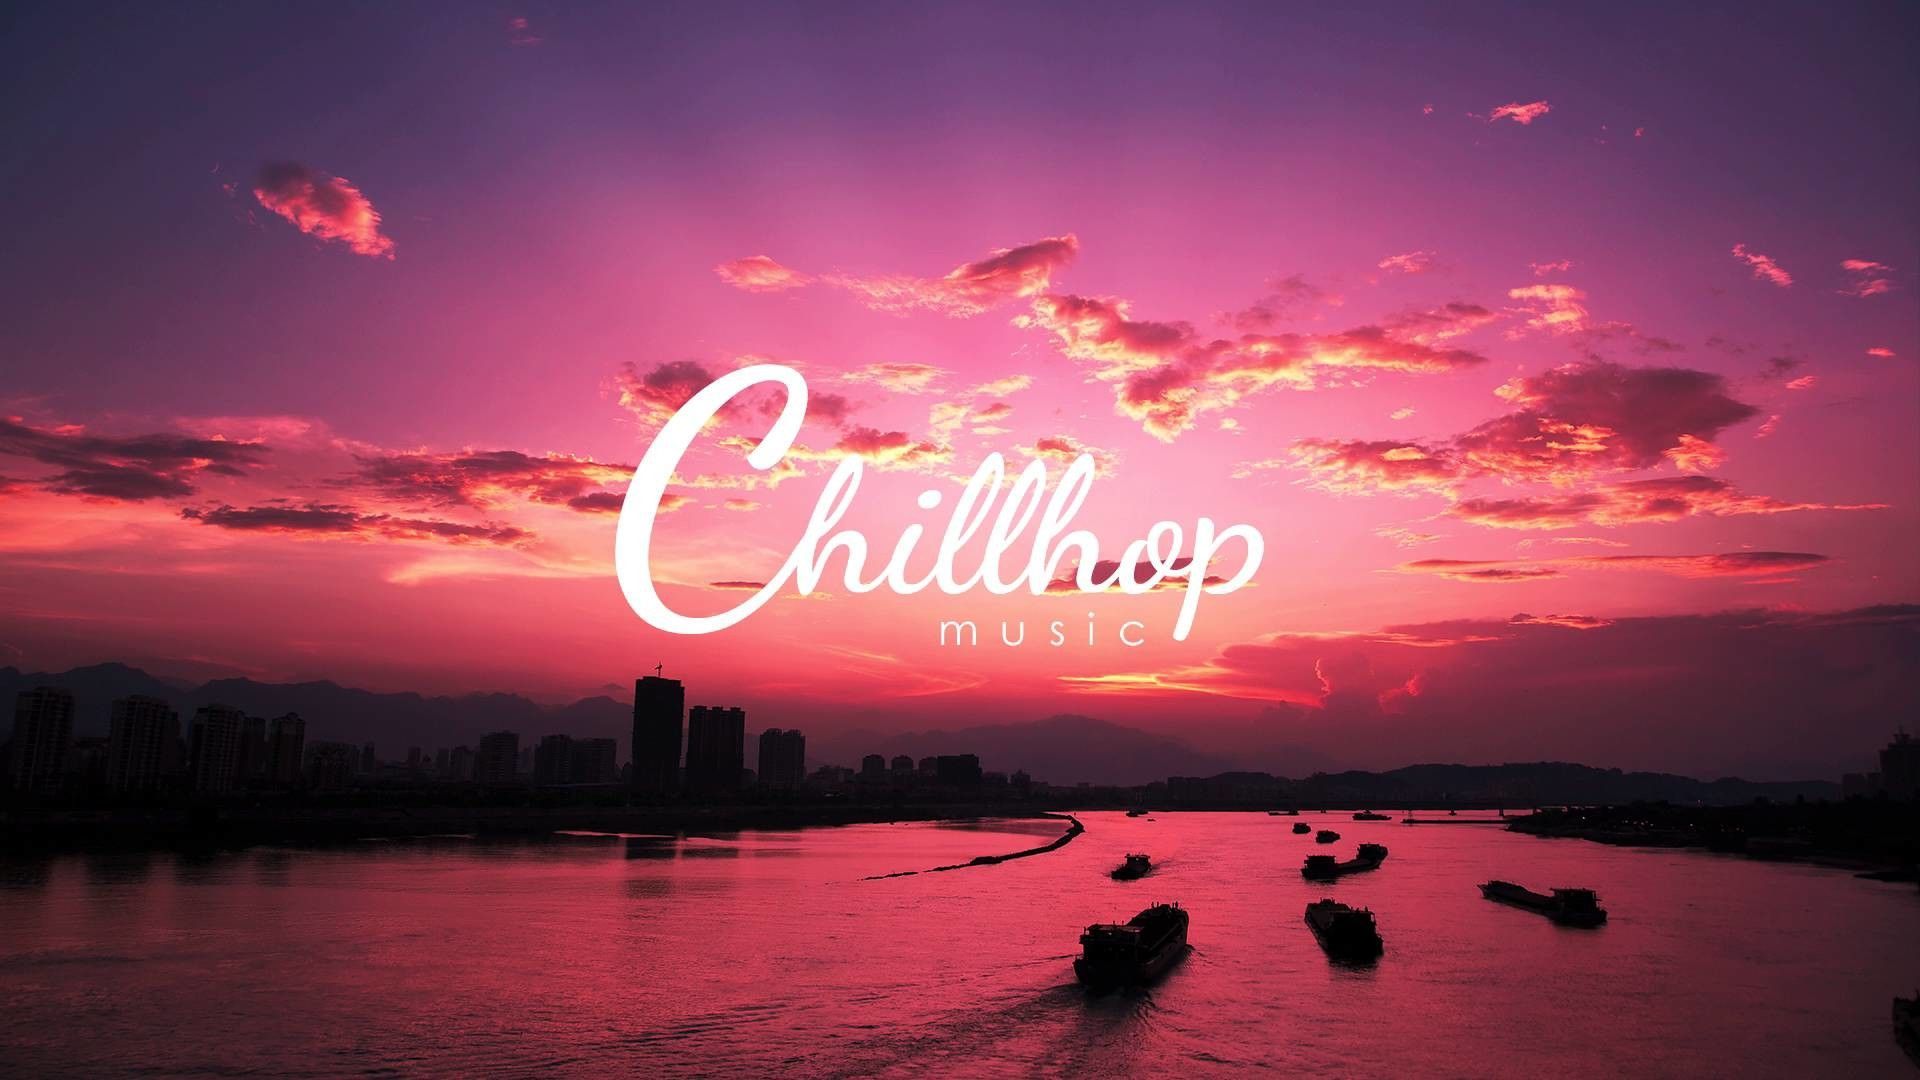 Chill Vibes Wallpapers on WallpaperDog